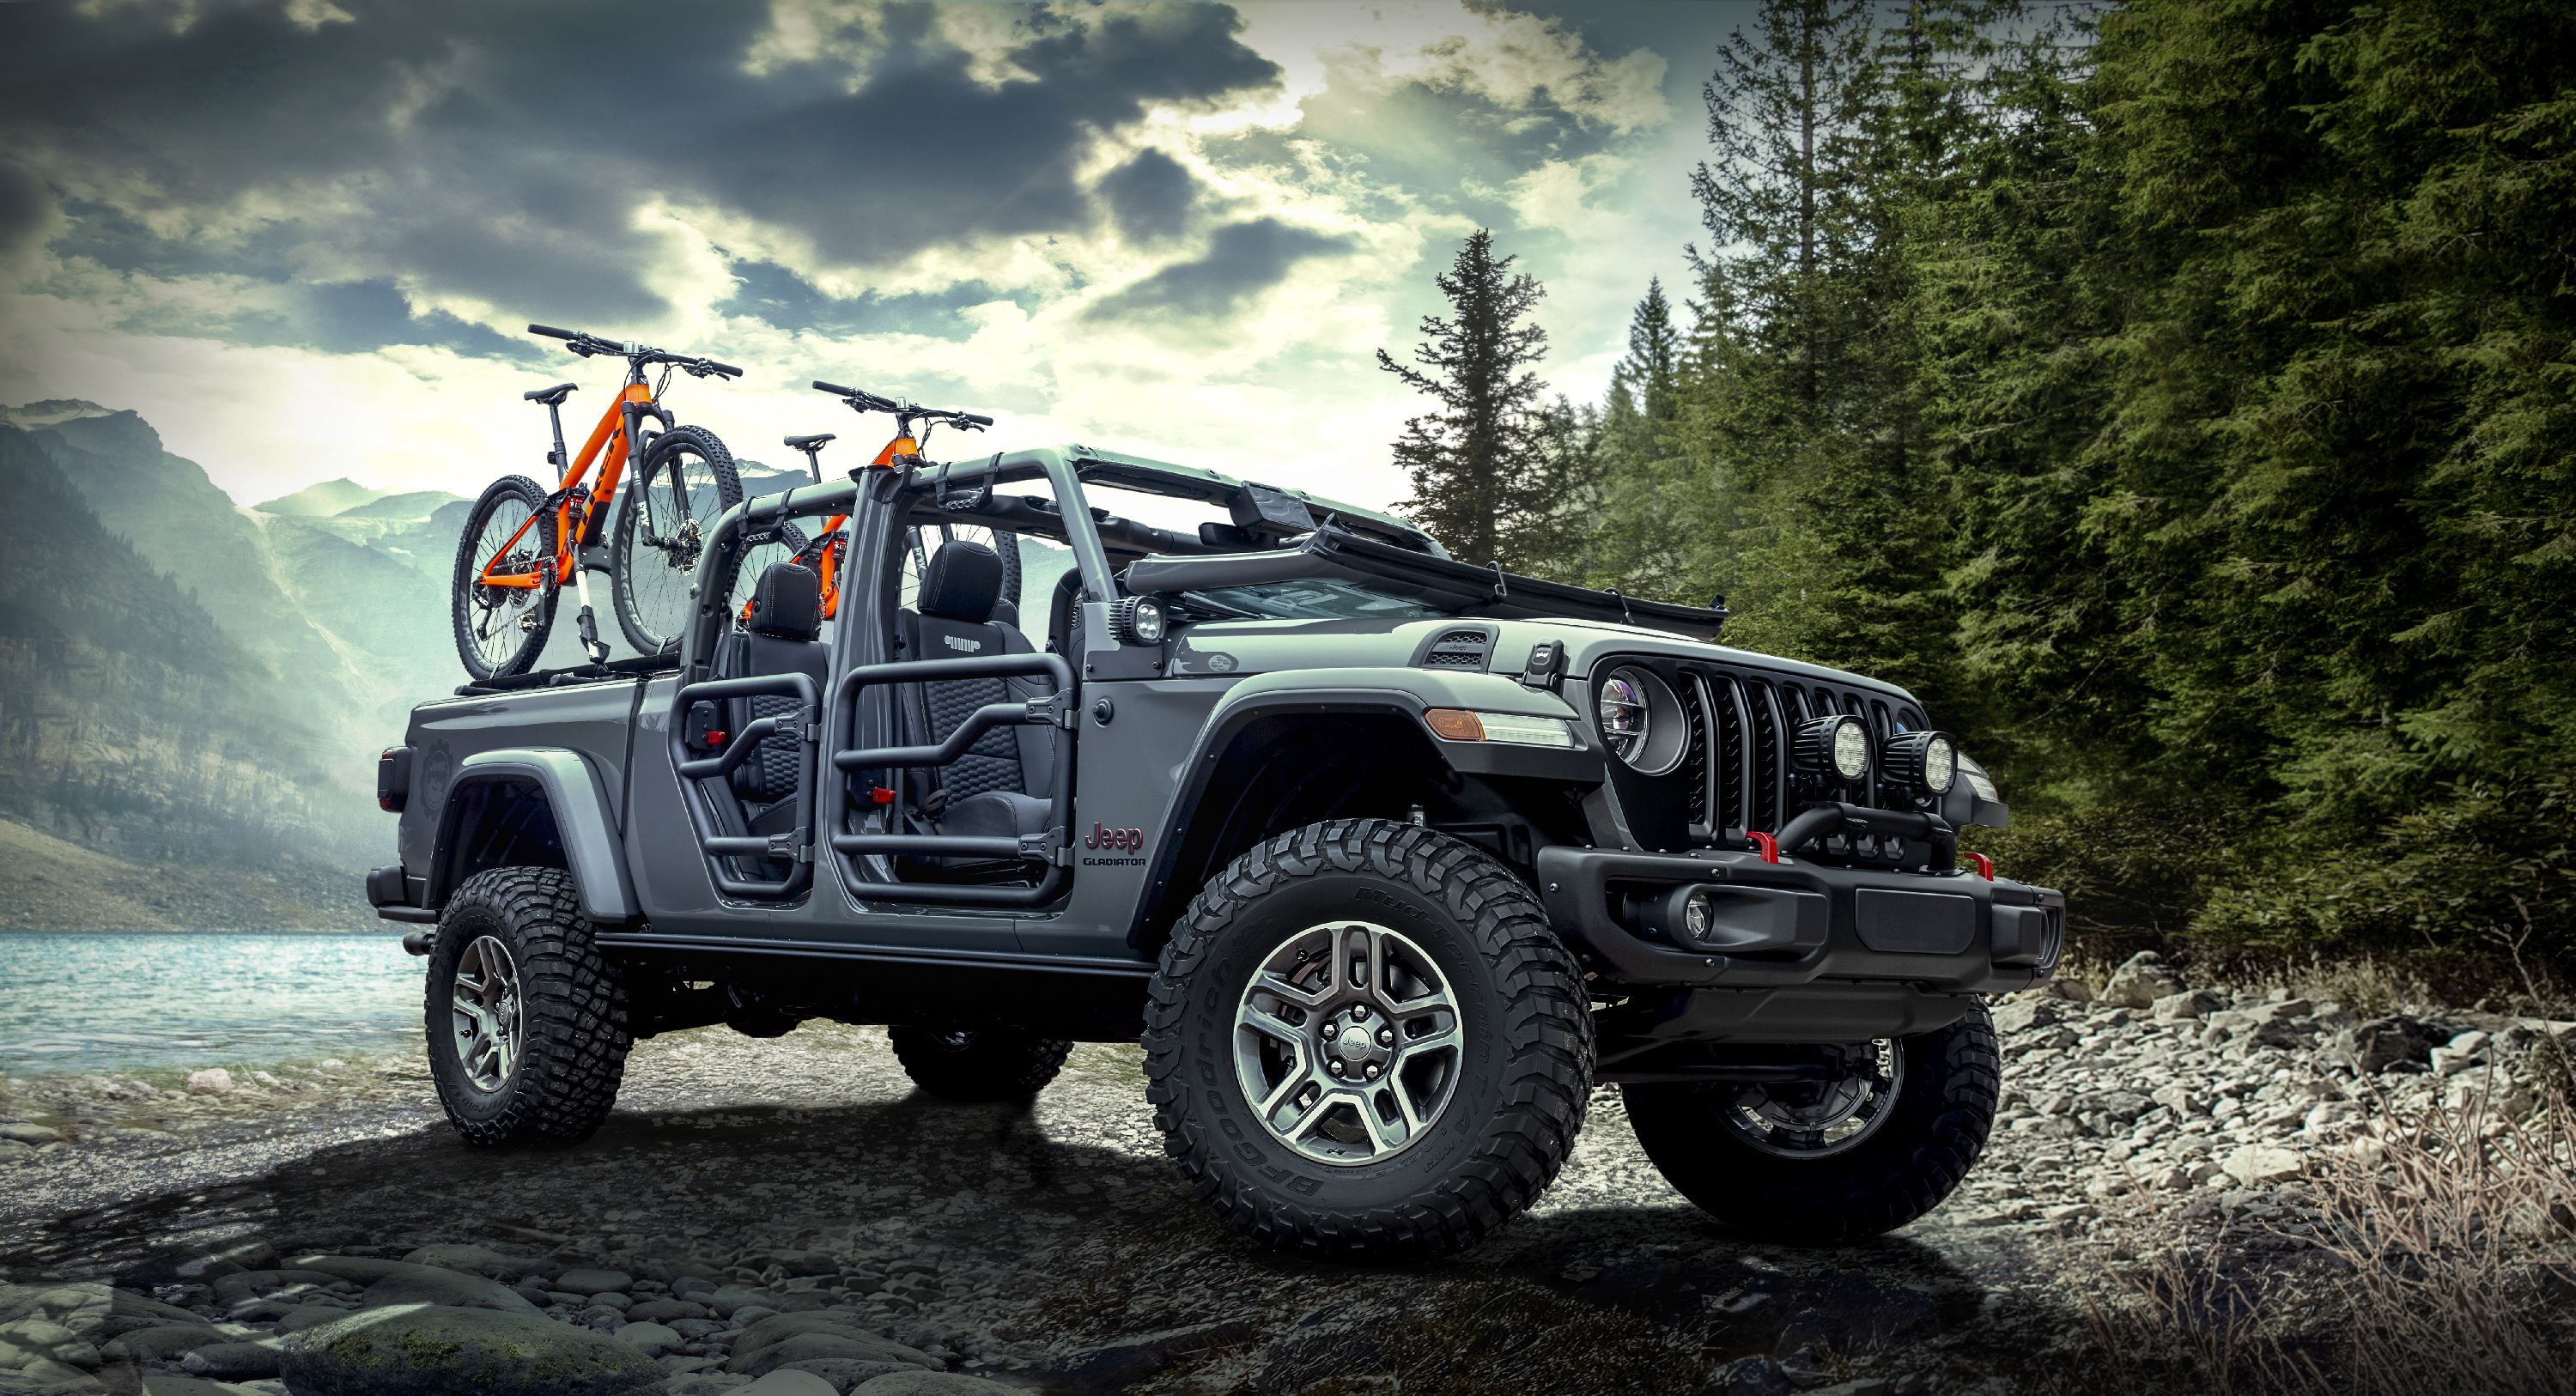 The Mopar-modified all-new 2020 Jeep® Gladiator Rubicon, on display at the 2018 Los Angeles Auto Show, highlights the open-air personalization potential and more than 200 parts and accessories available to enhance the most capable midsize truck ever.